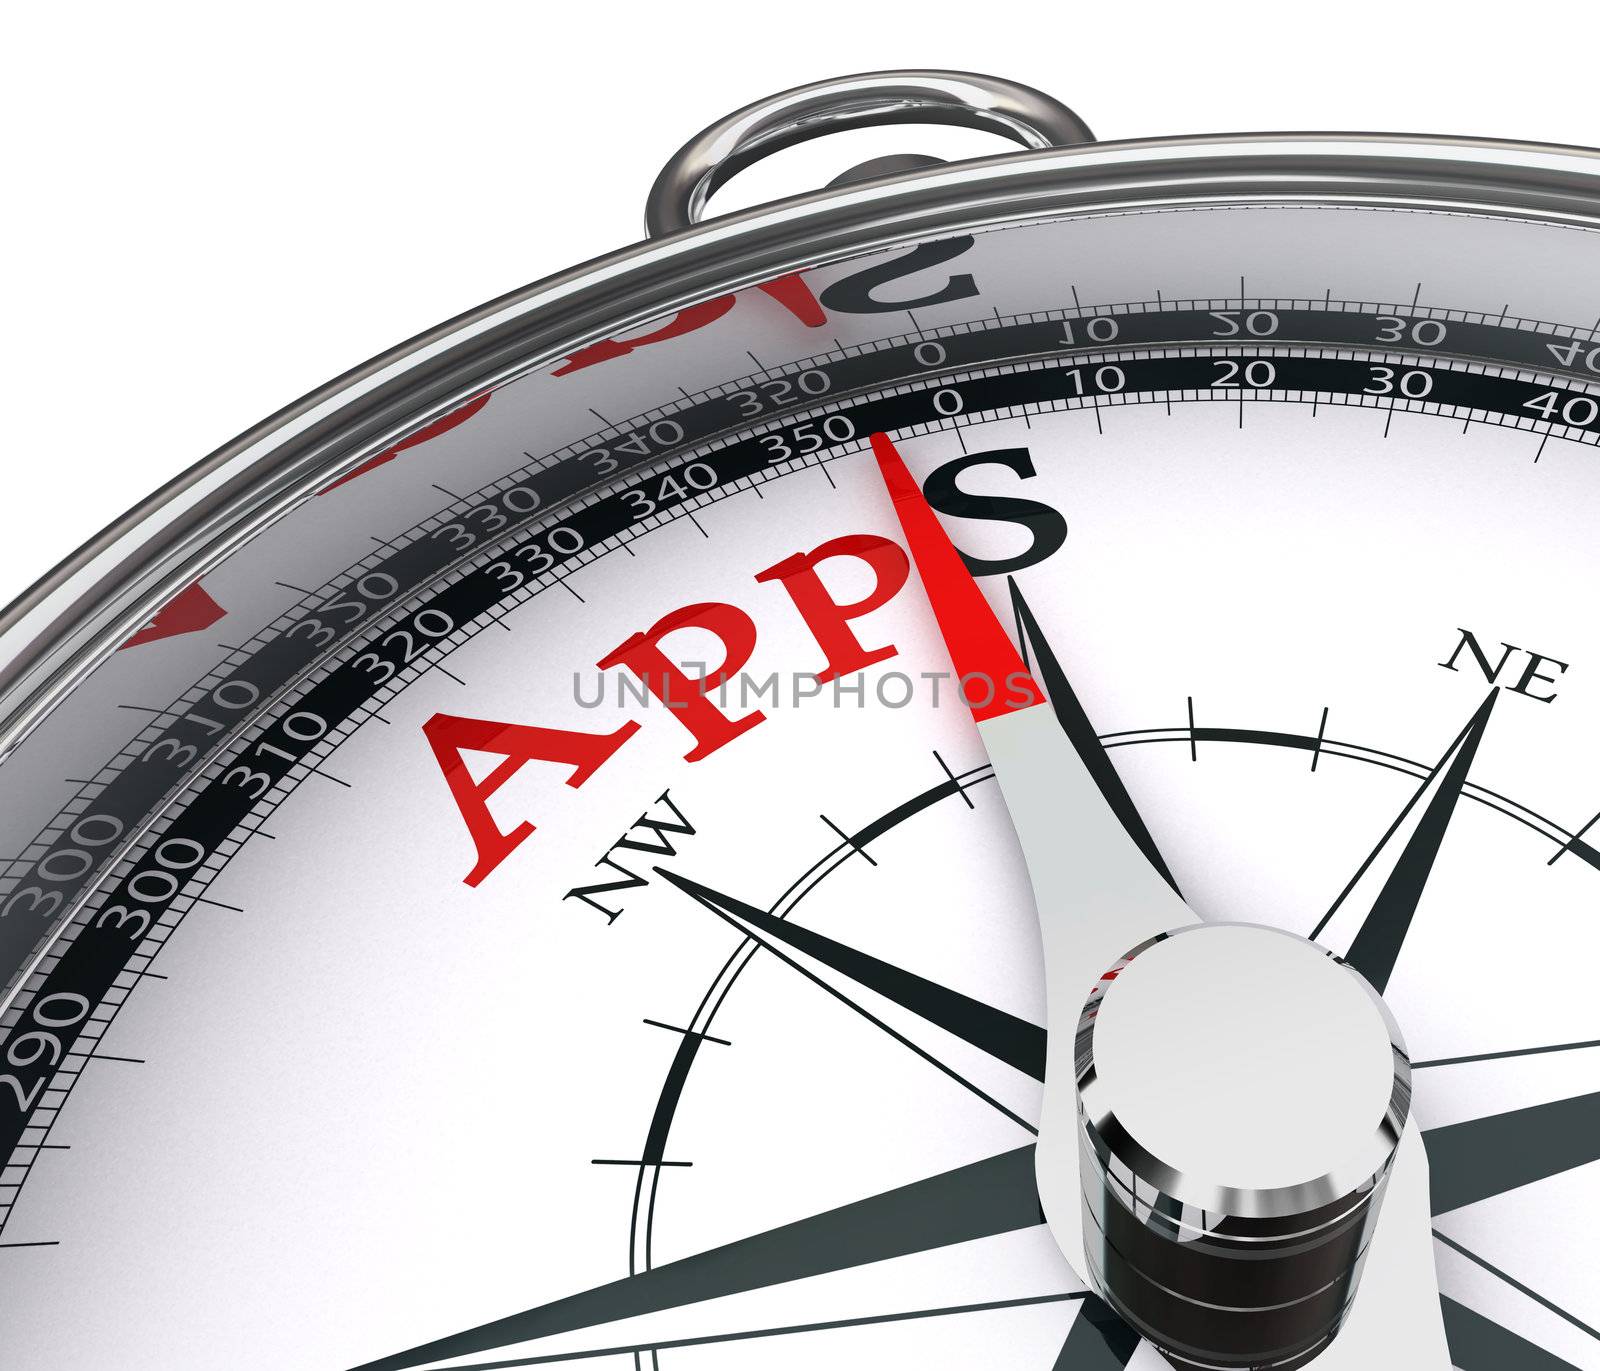 apps the way indicated by compass conceptual image.clipping path included